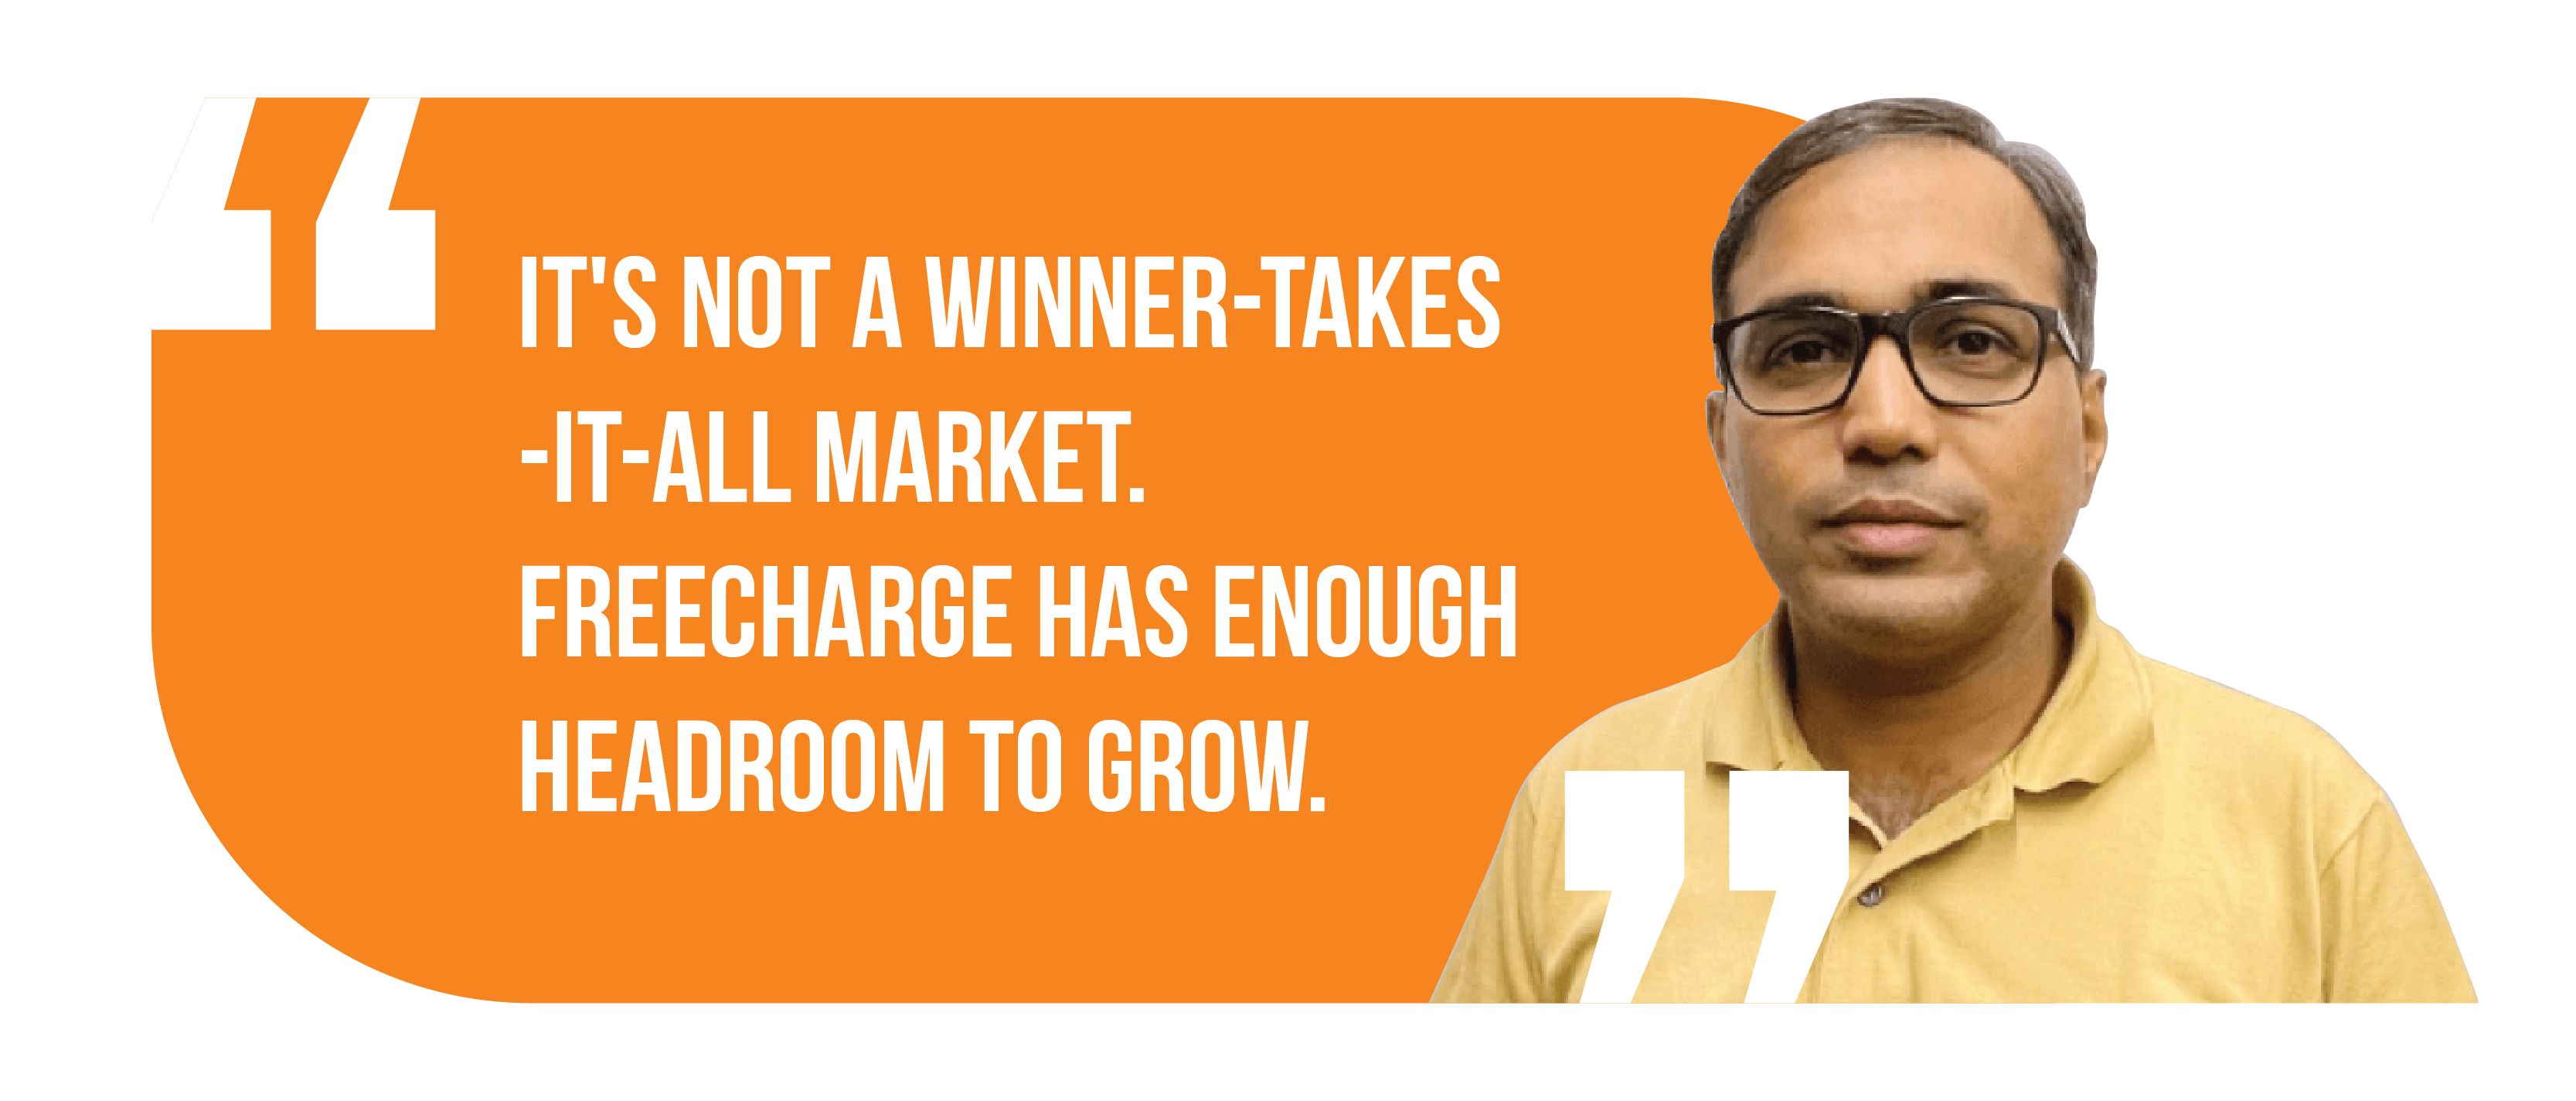 Mohit Jain, MD and CEO, Freecharge 